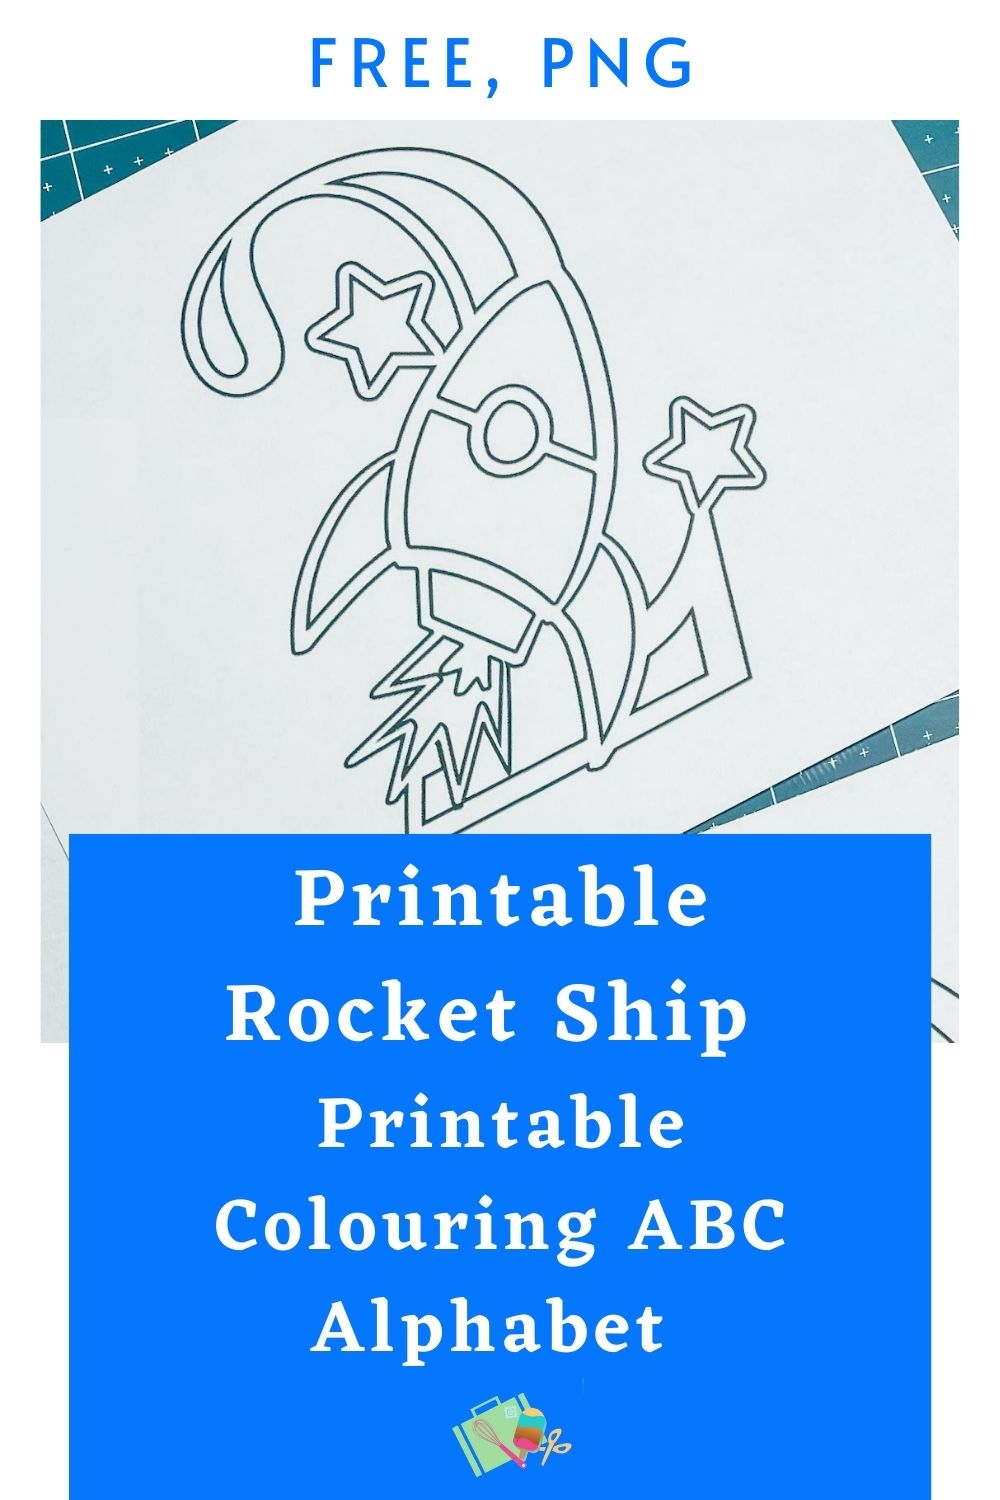 Free printable ABC Rocket Ship Space colouring alphabet for home learning and schools